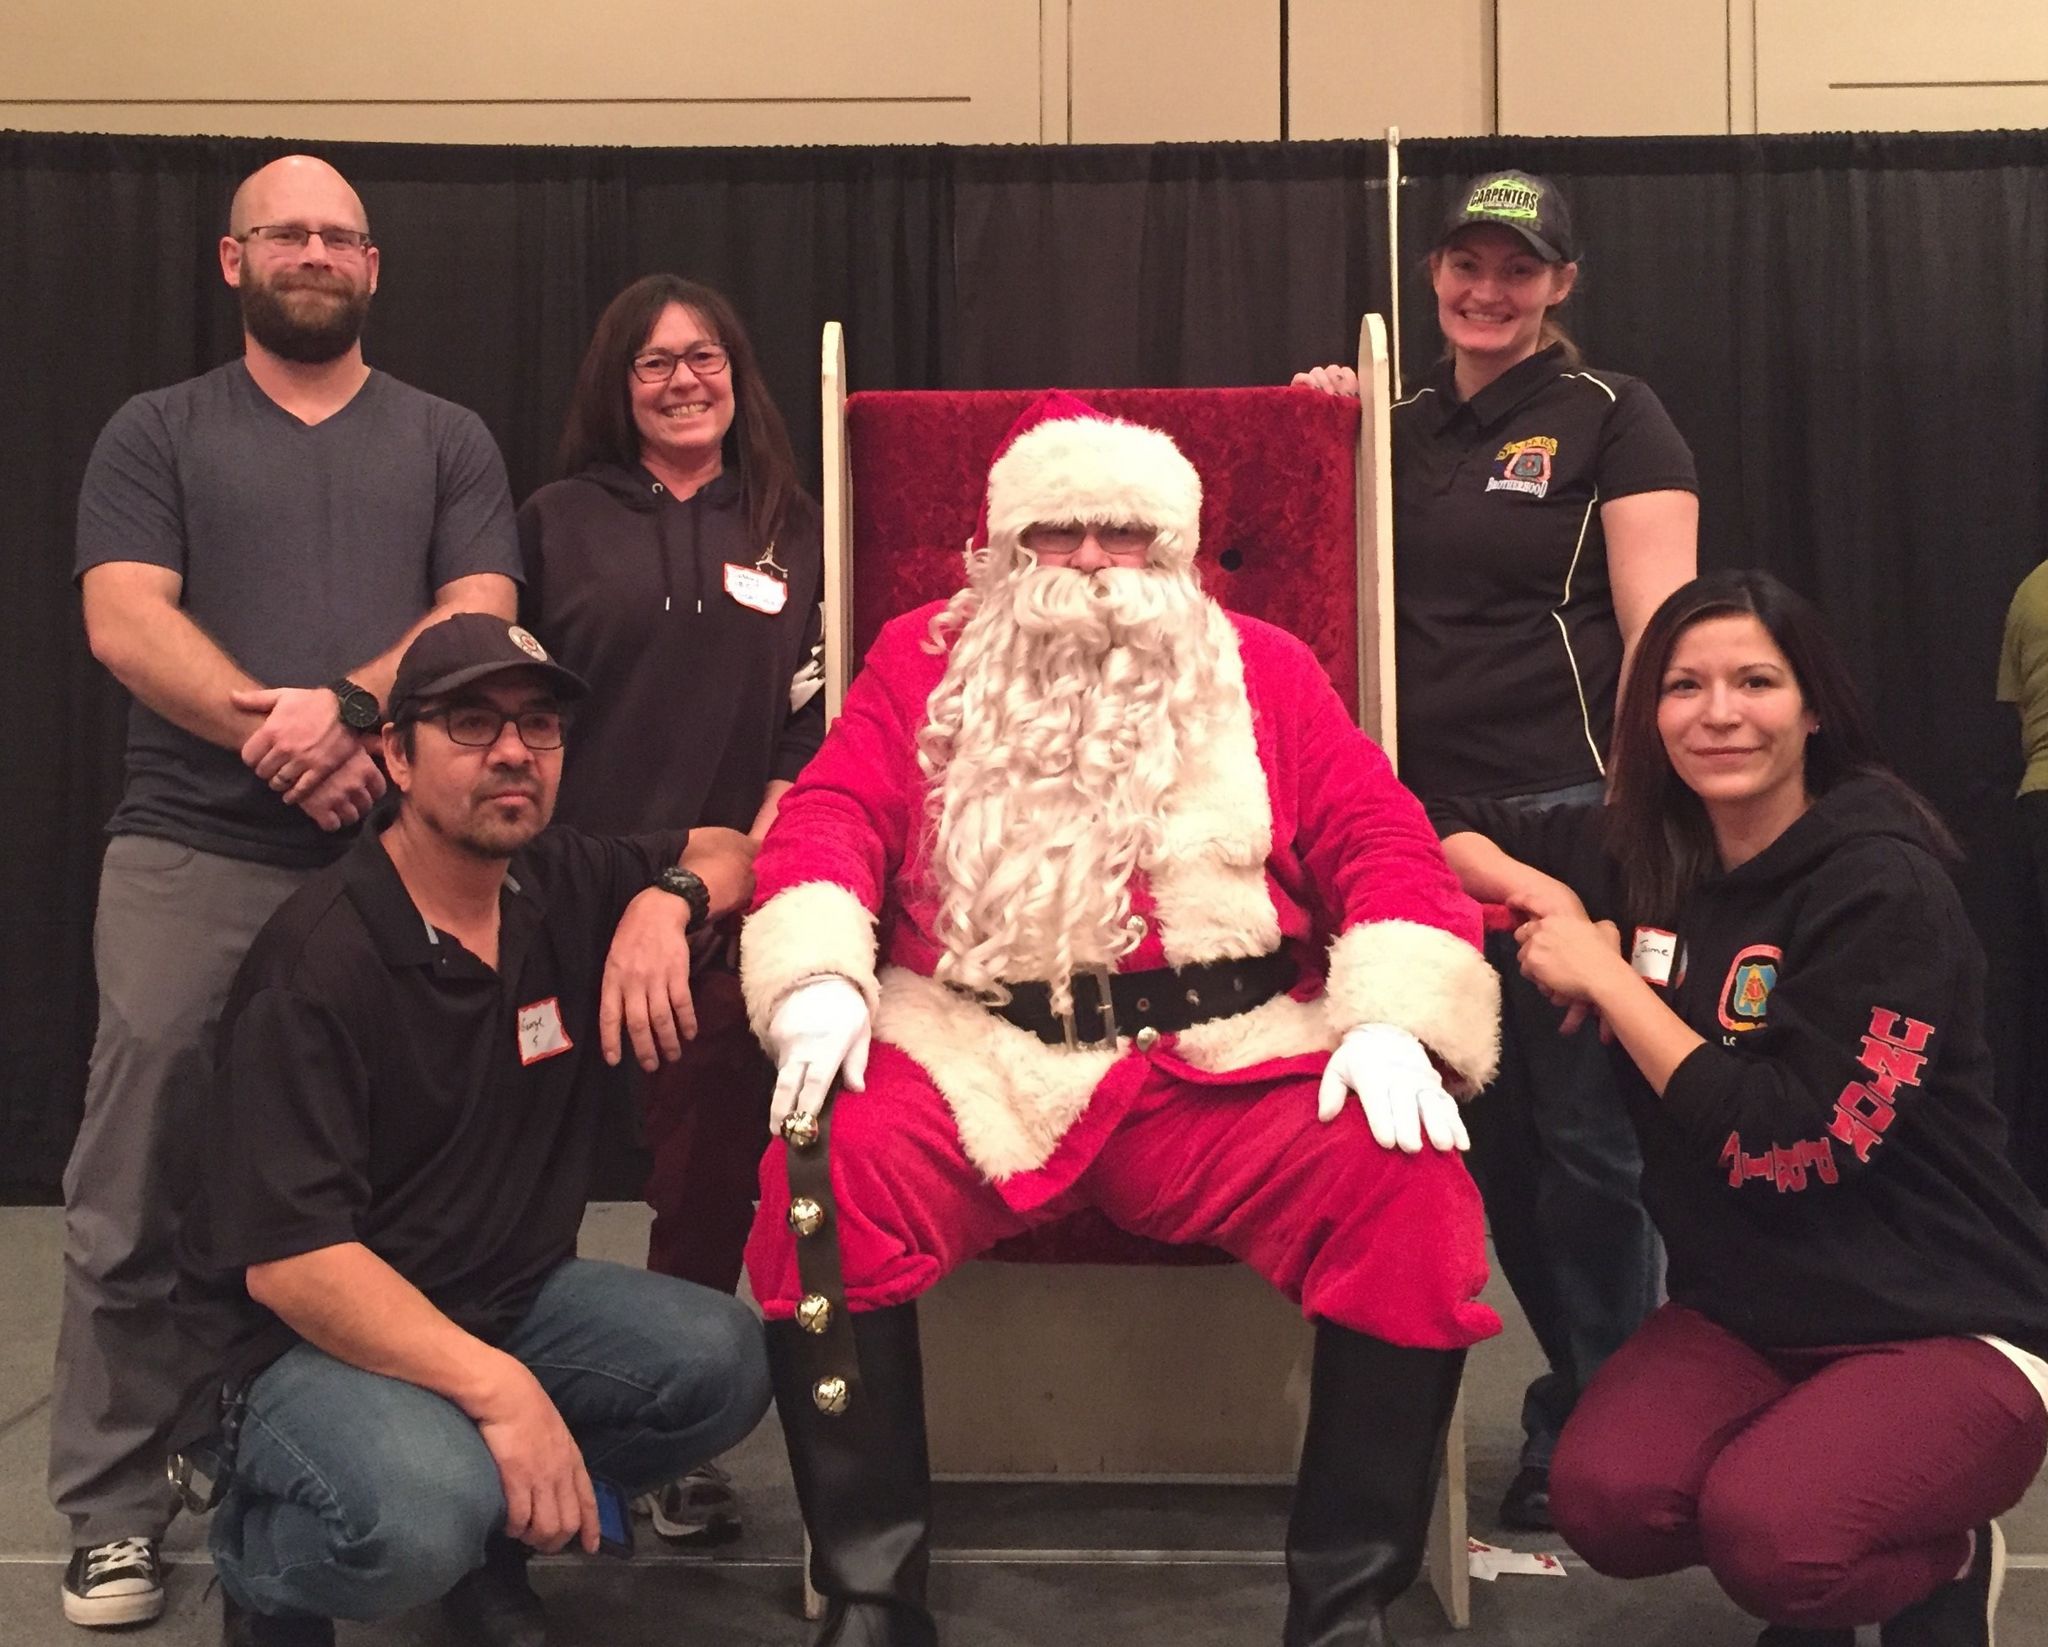 Members volunteered at the 18th Annual Unions of Regina Christmas Dinner